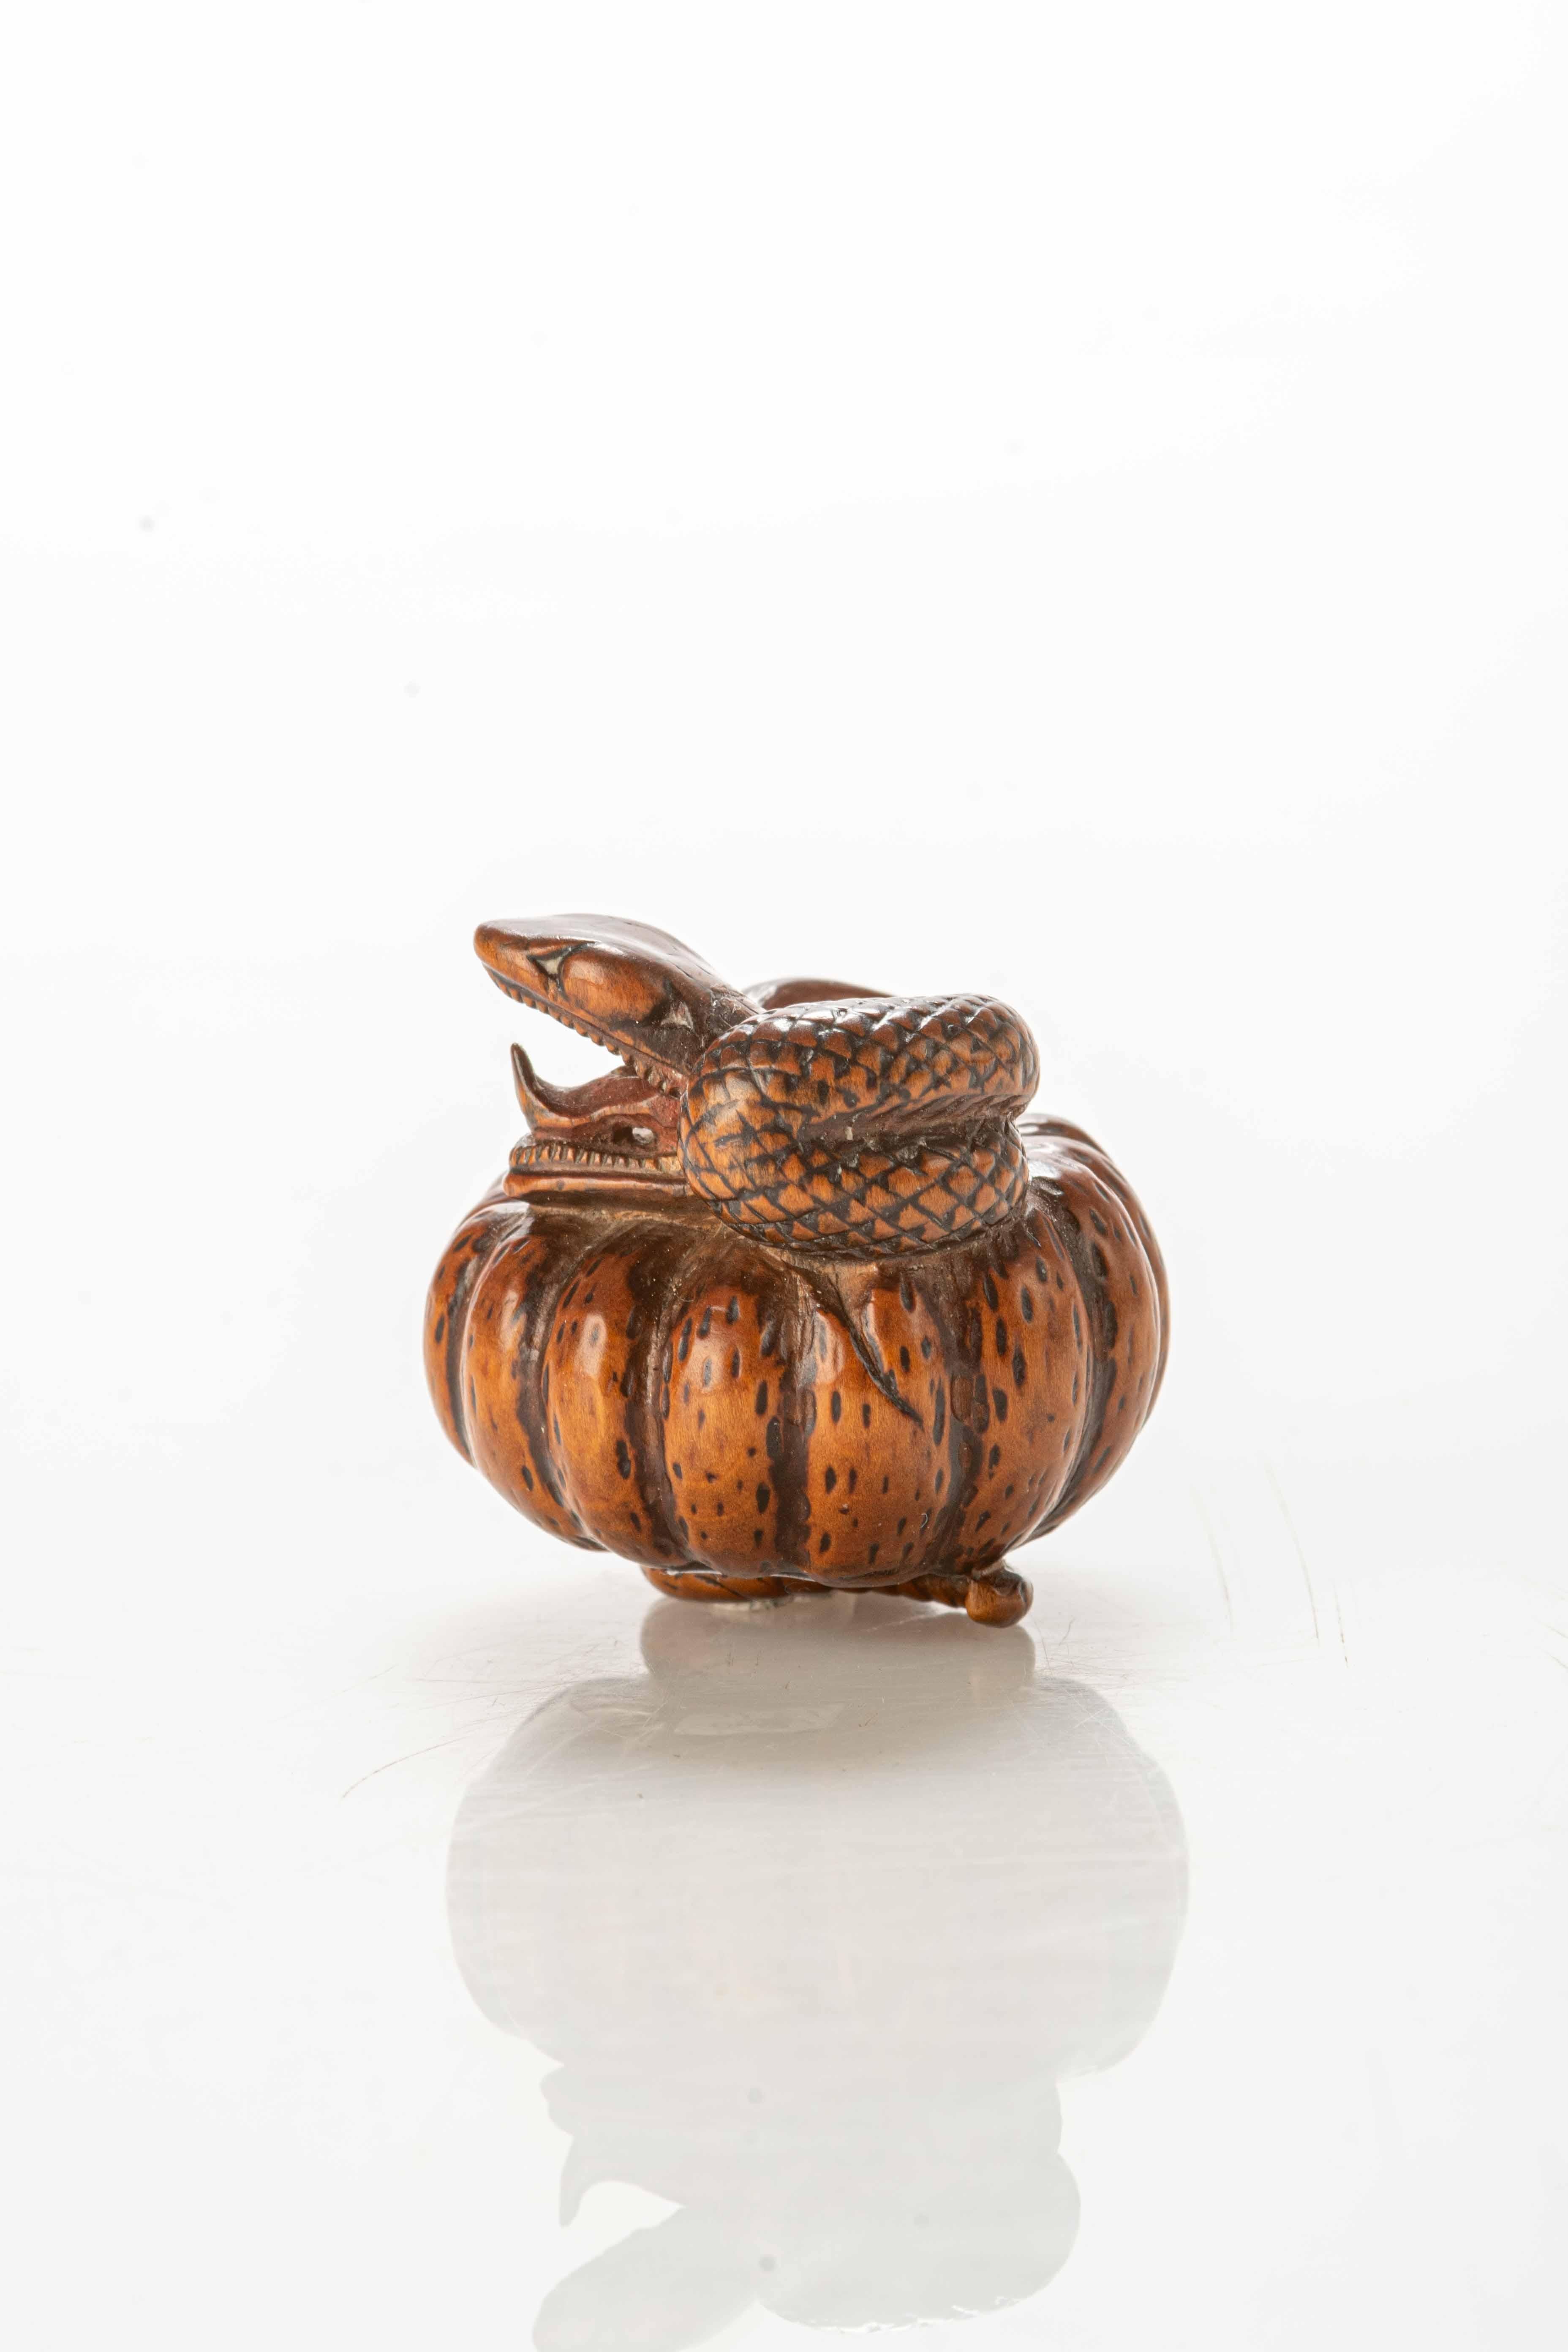 Japonisme A boxwood netsuke depicting a snake wrapping around a pumpkin For Sale